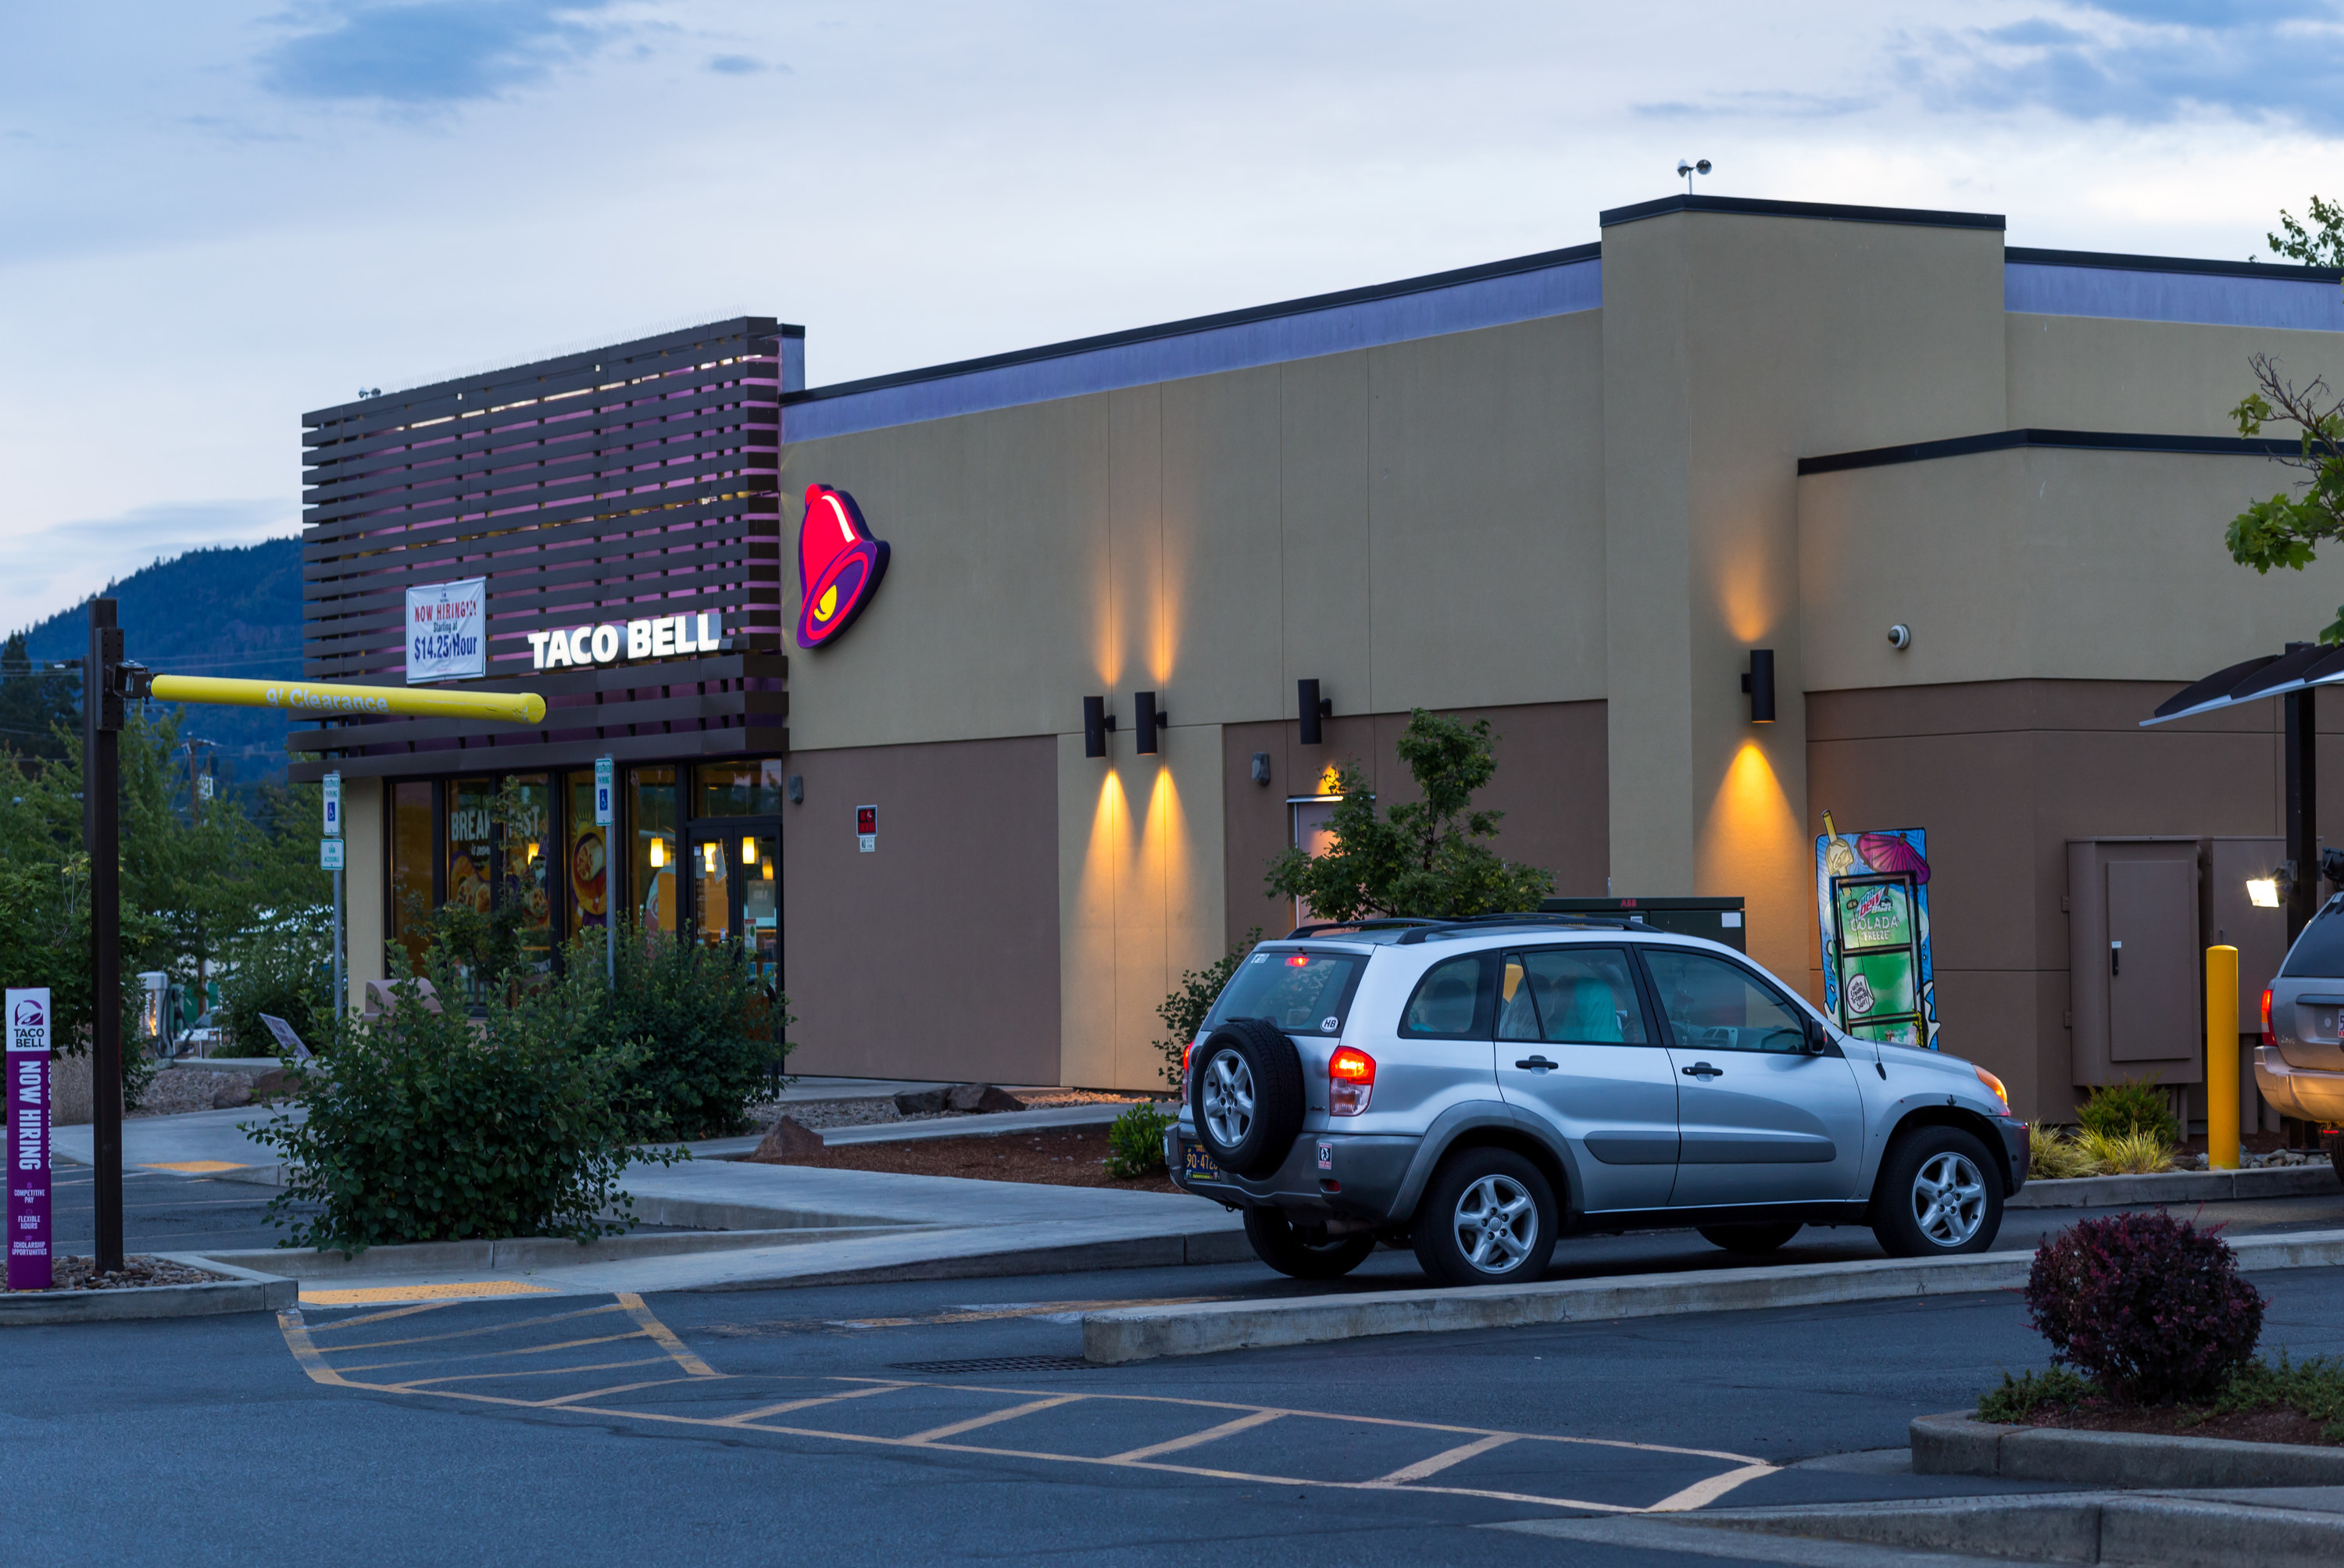 The exterior of a Taco Bell restaurant